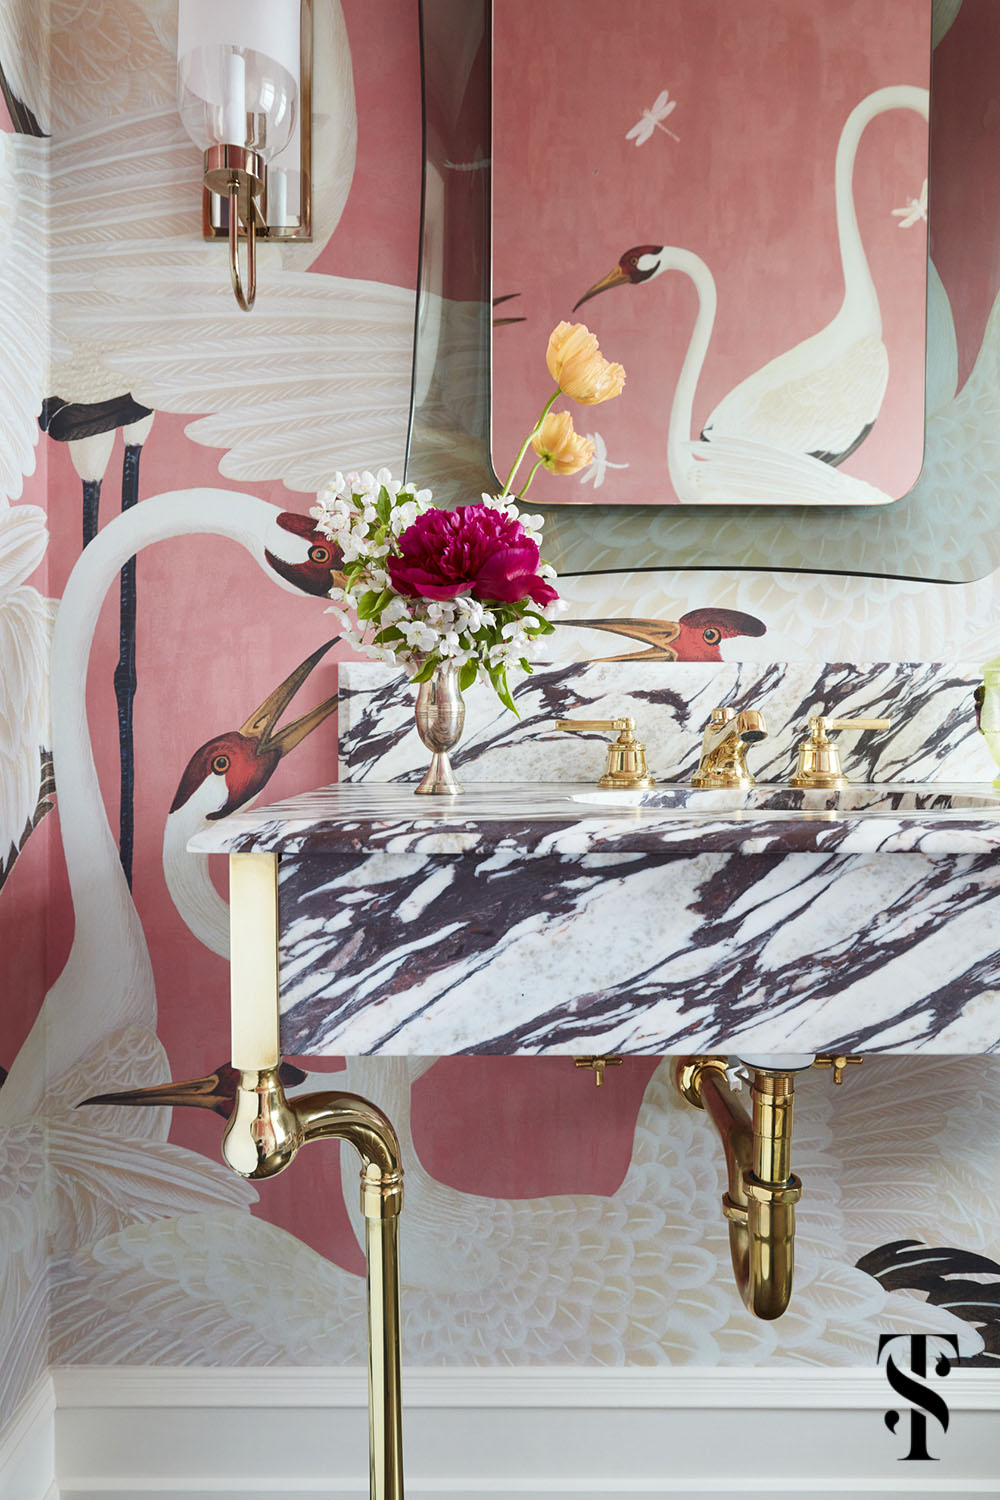 Summer Thornton designed this over-the-top powder room featuring pink herron birds by Gucci and flooring with brass inlays in concentric rectangles.